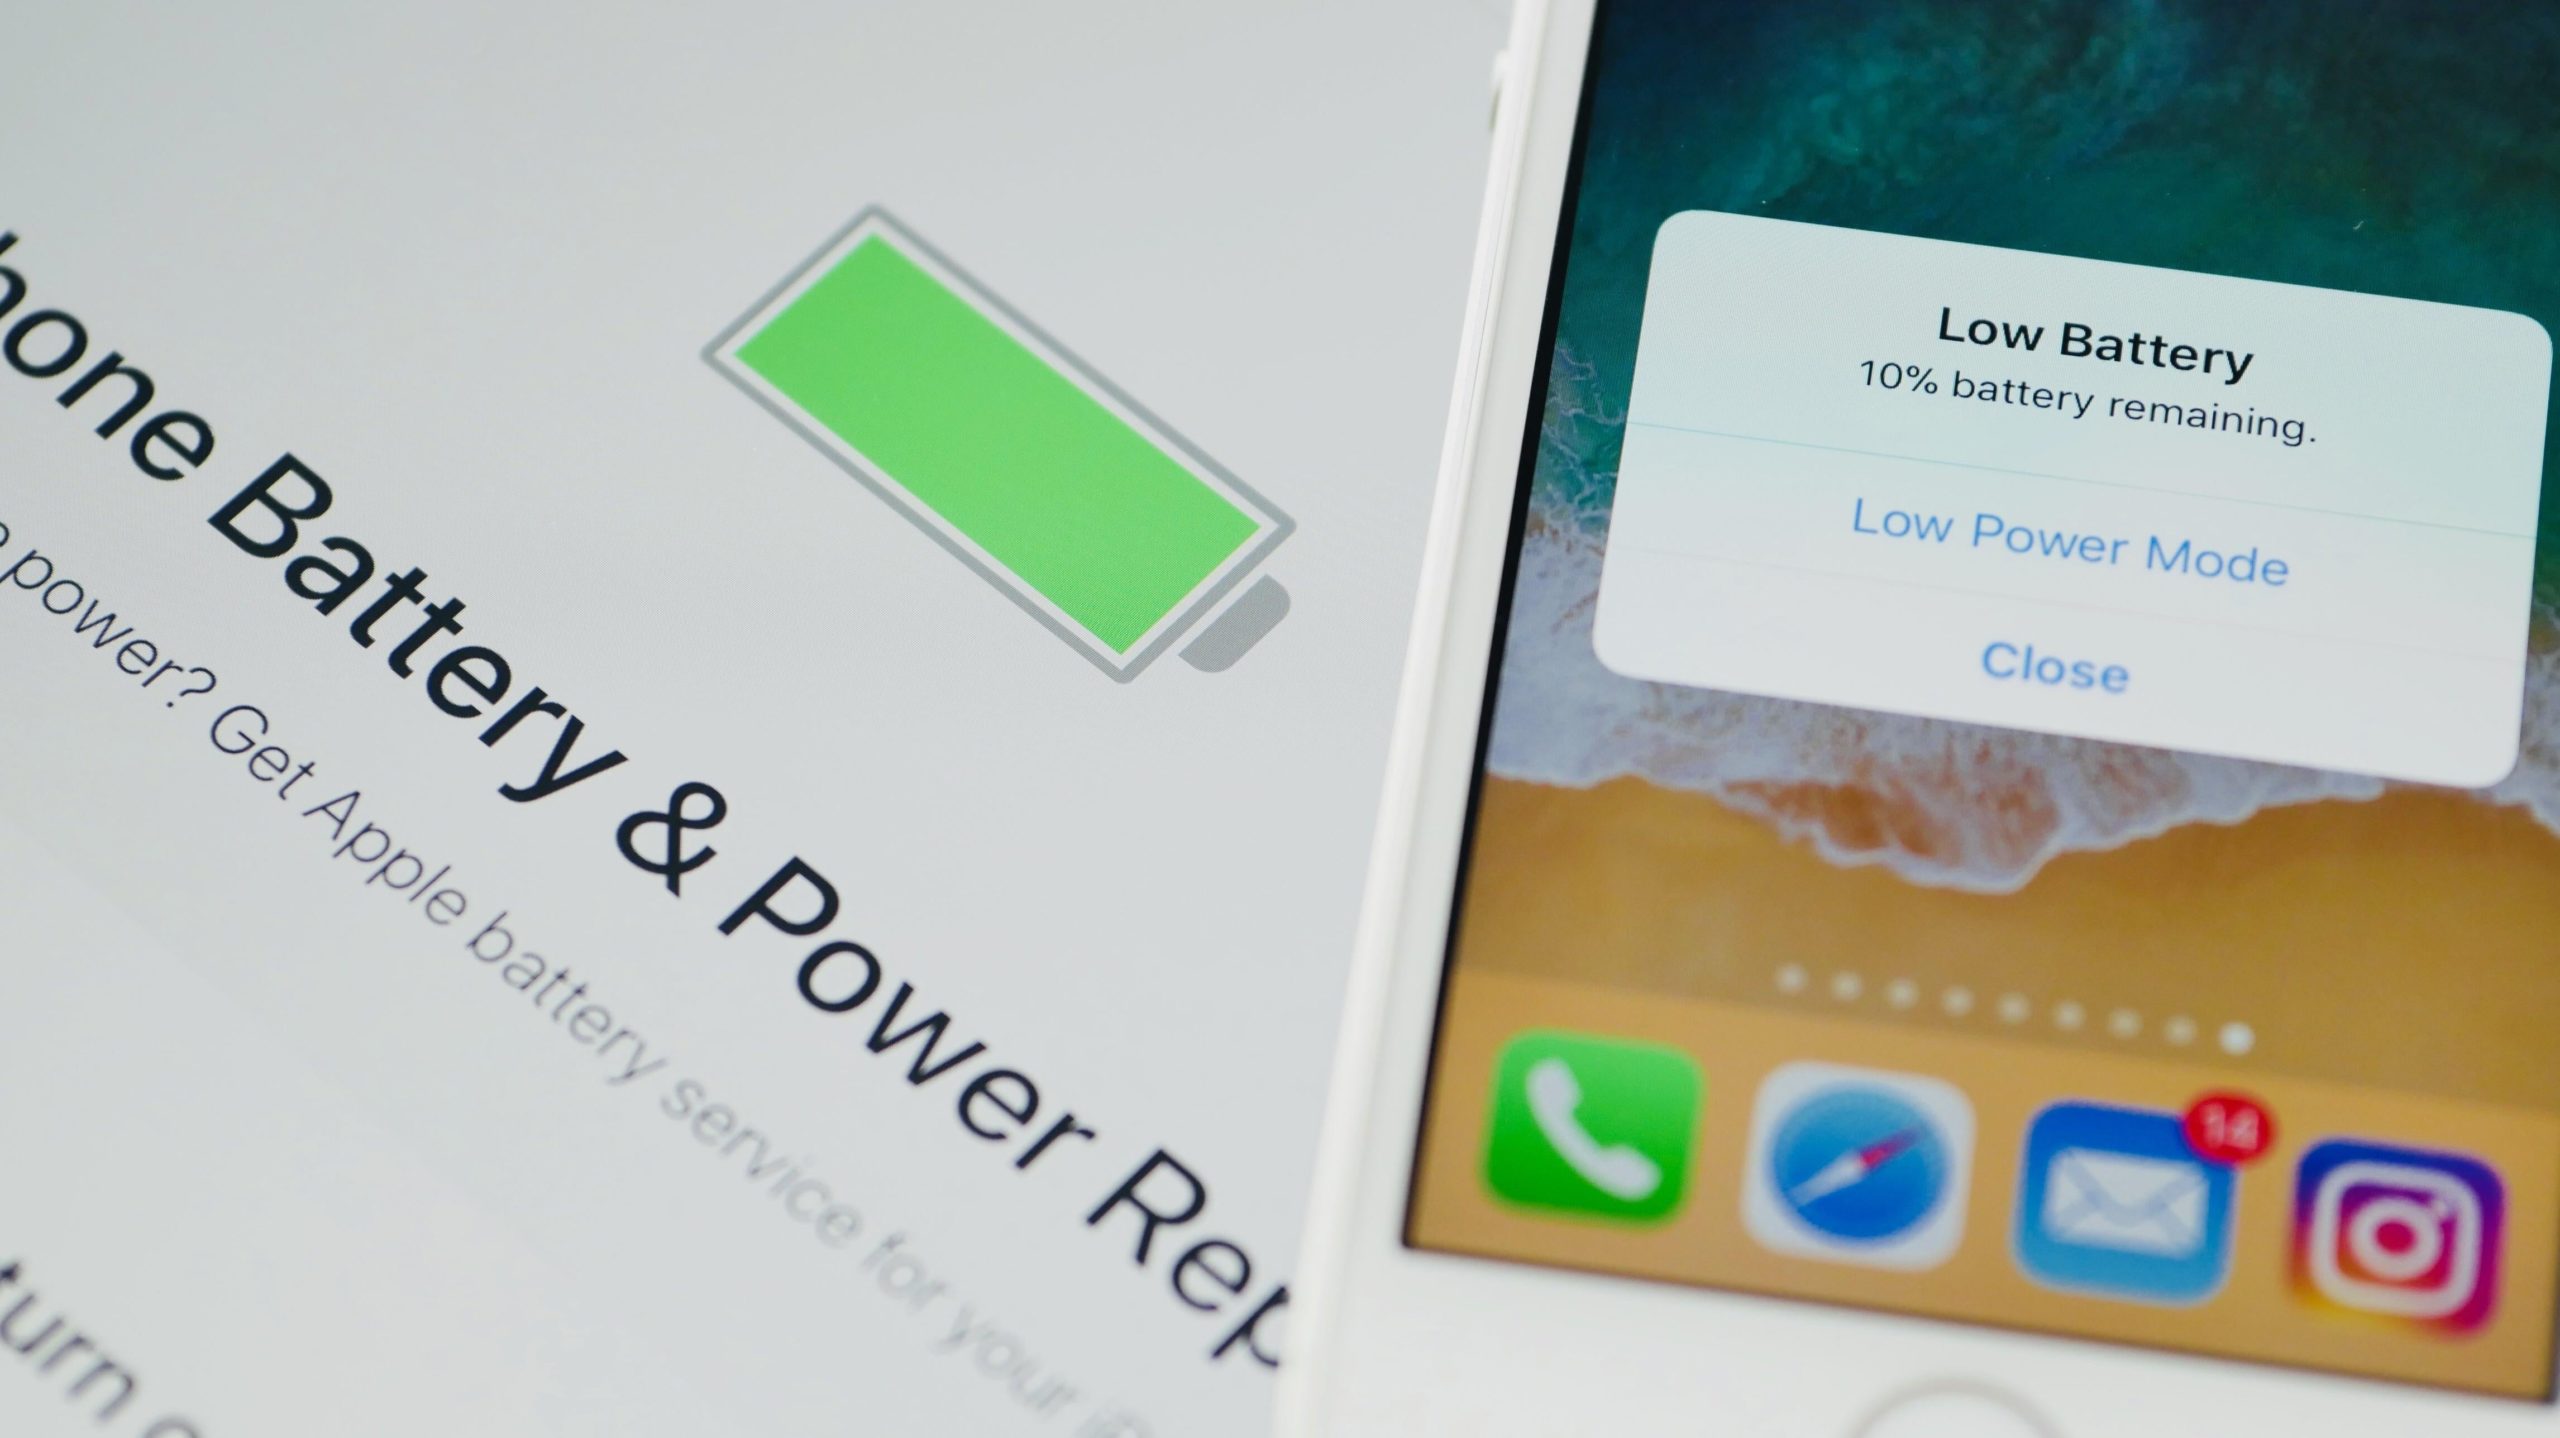 You Can Customise ‘Low Power Mode’ on Your iPhone